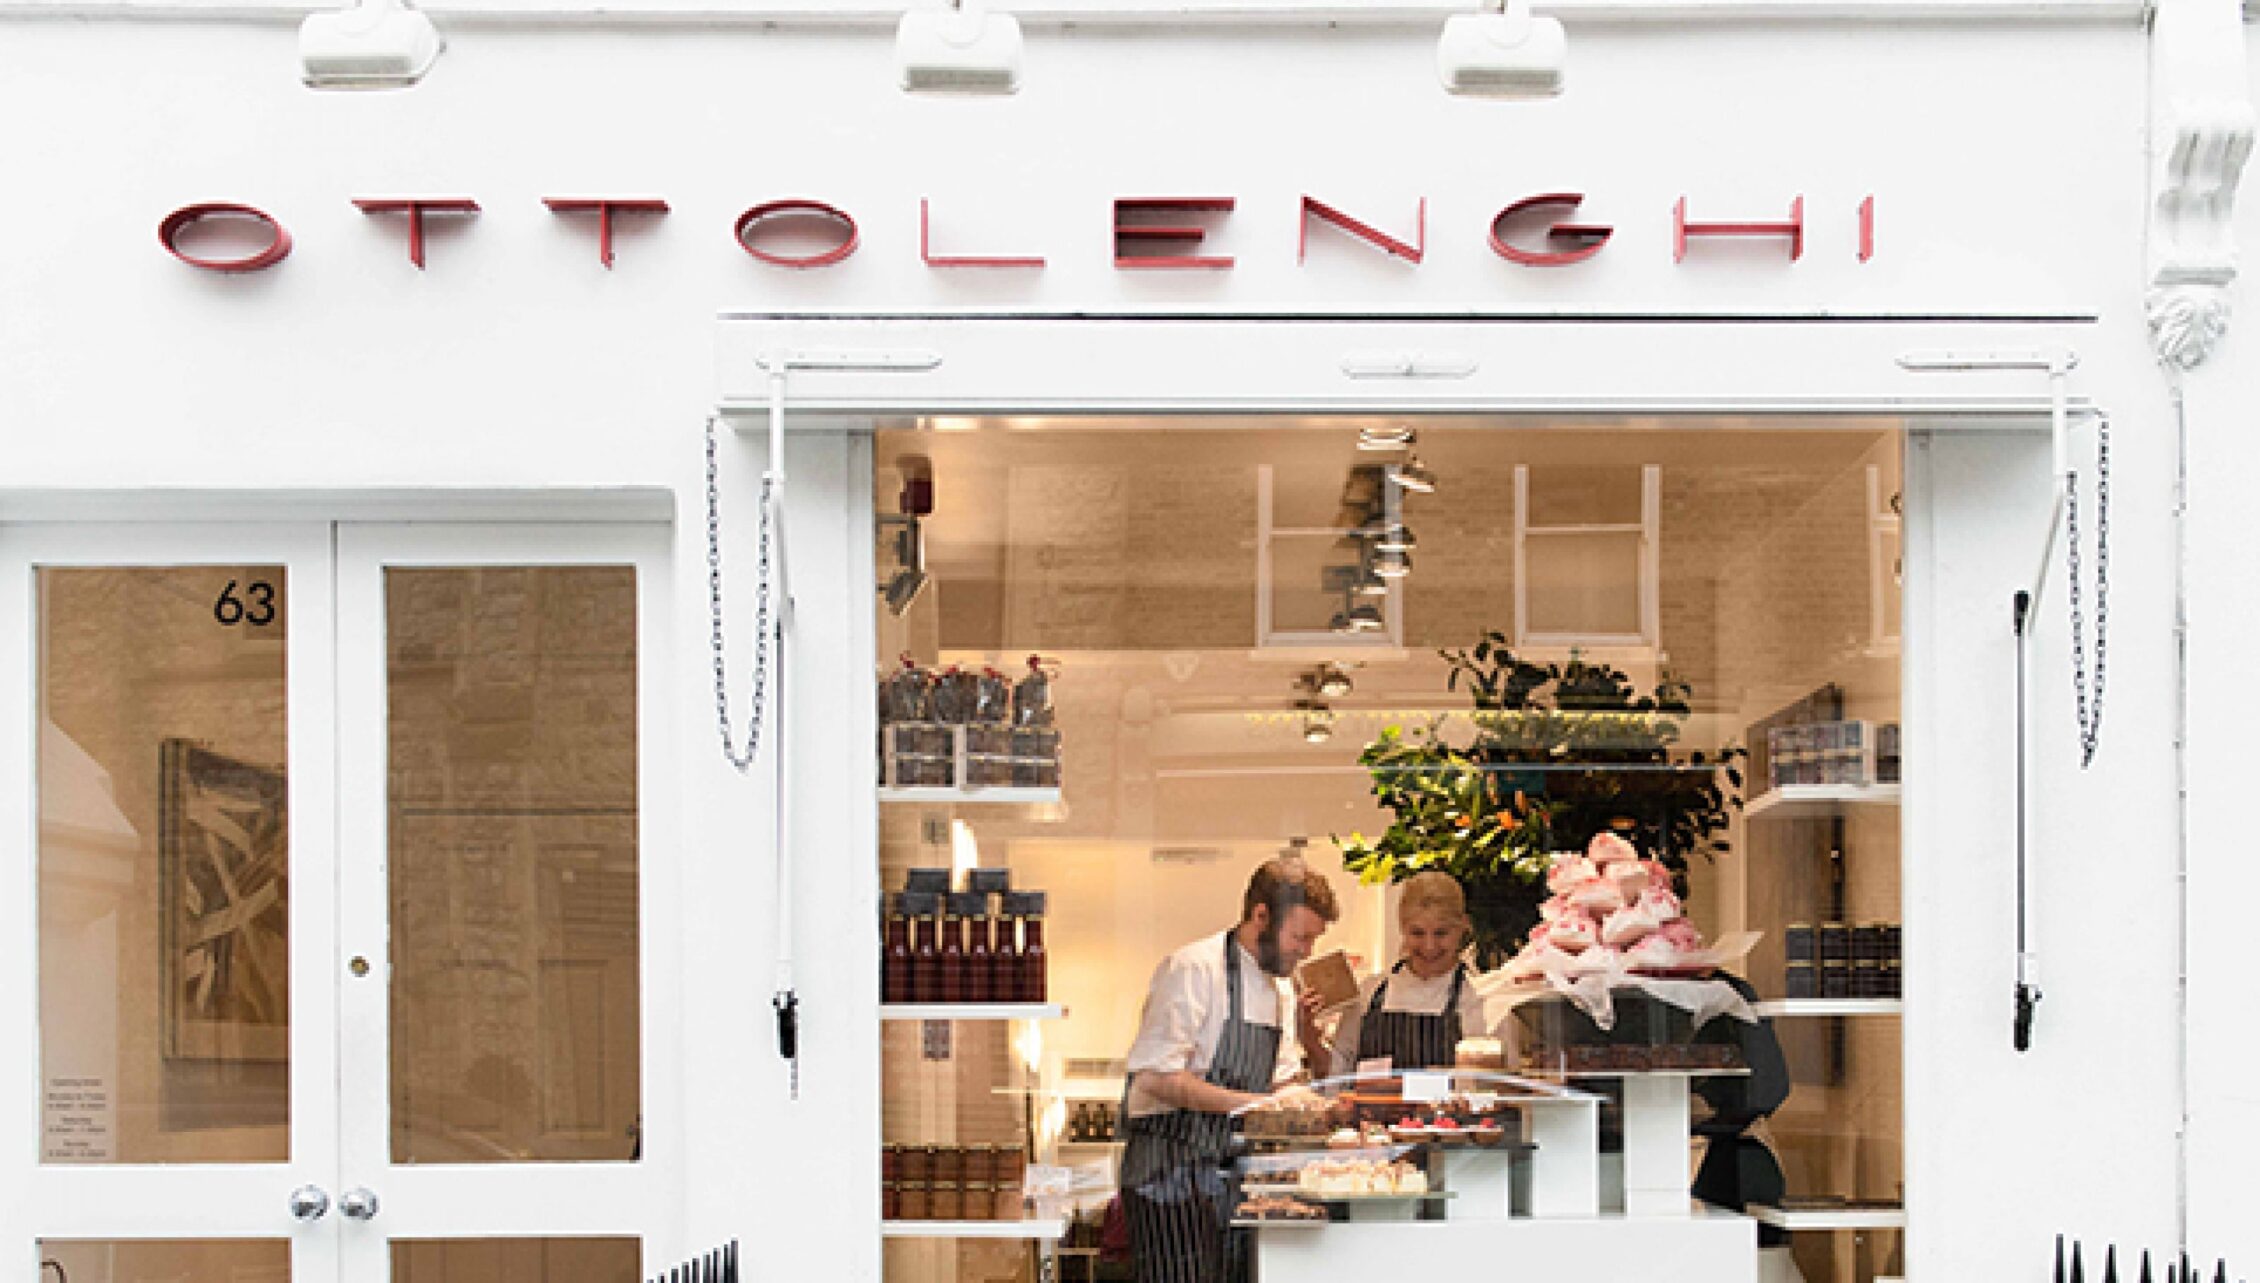 OTTOLENGHI-72DPI-CROPPED